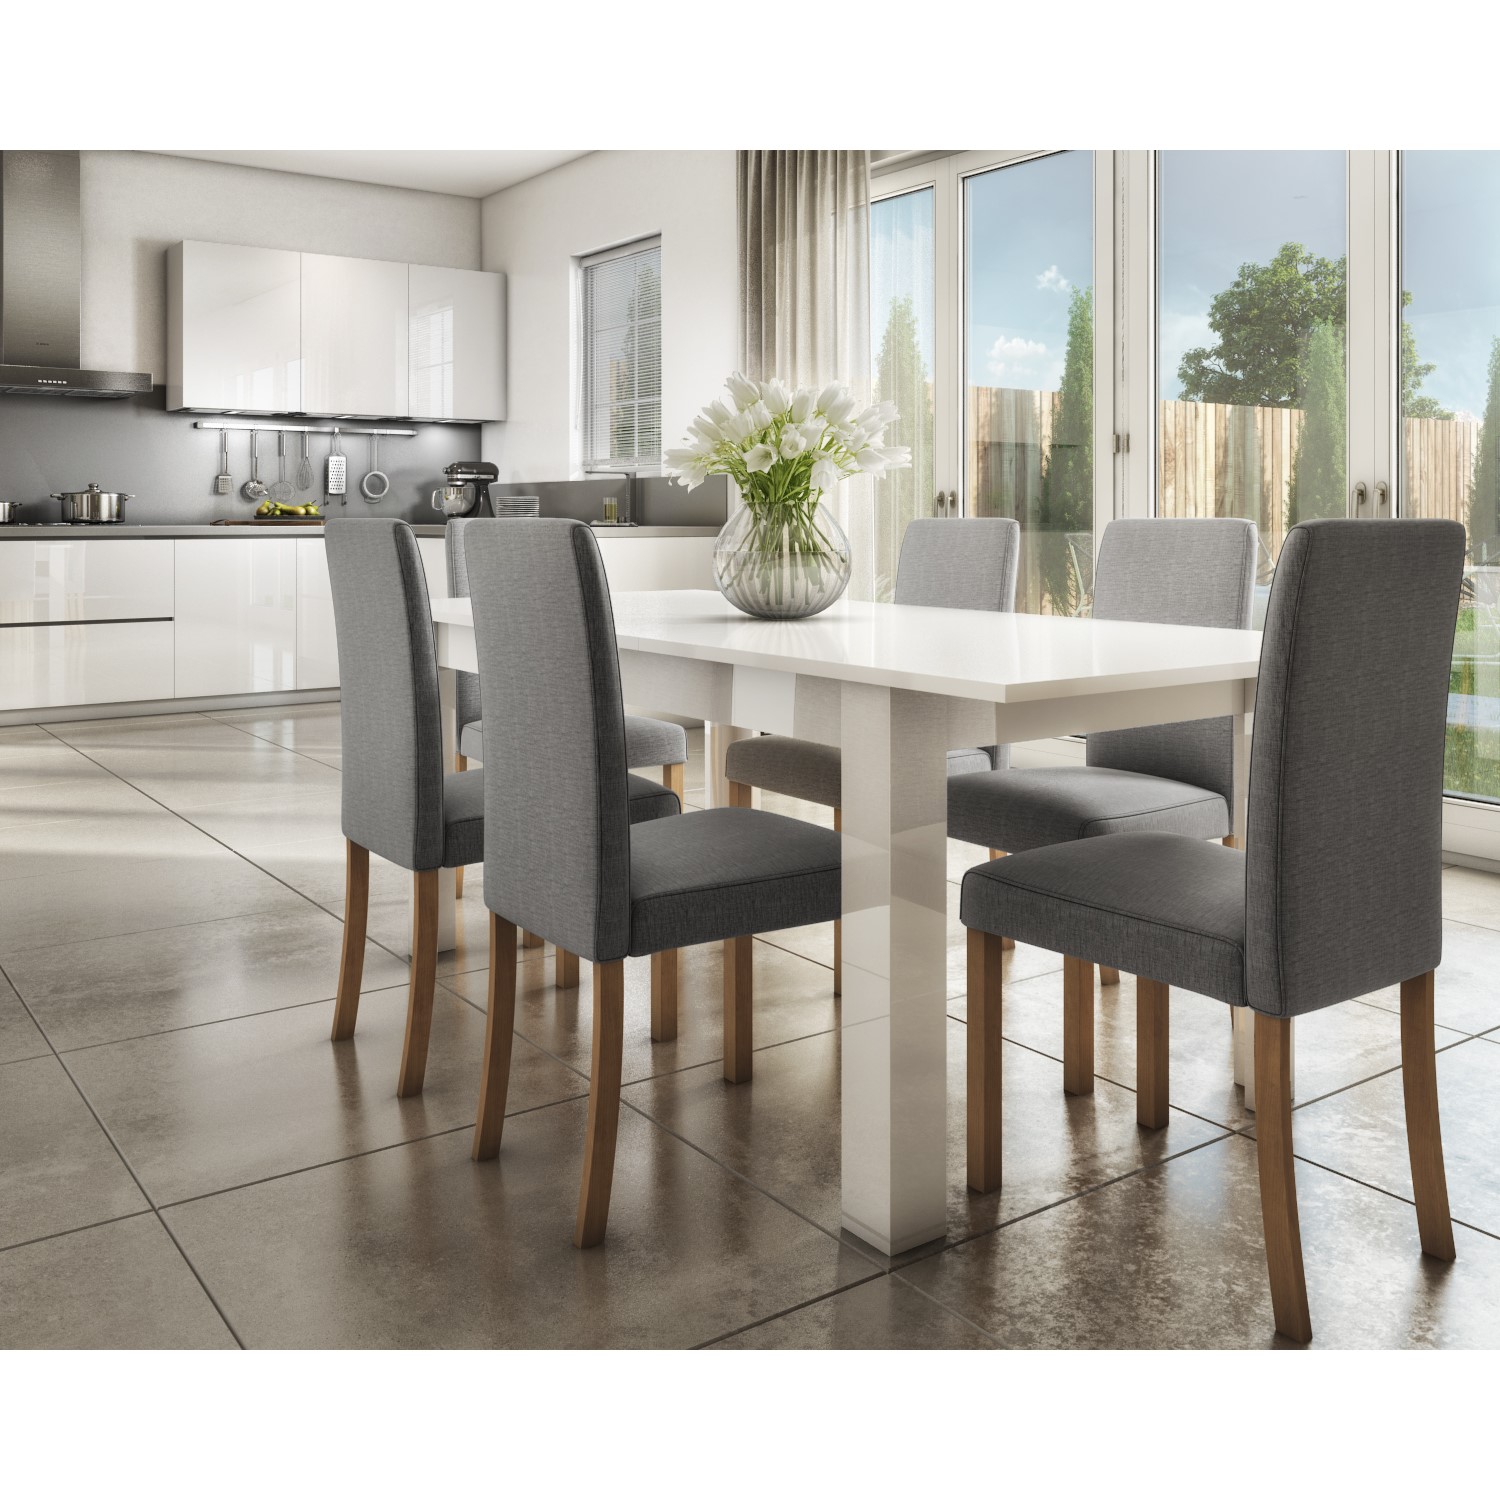 Extendable Dining Table In White High Gloss With 6 Grey Chairs